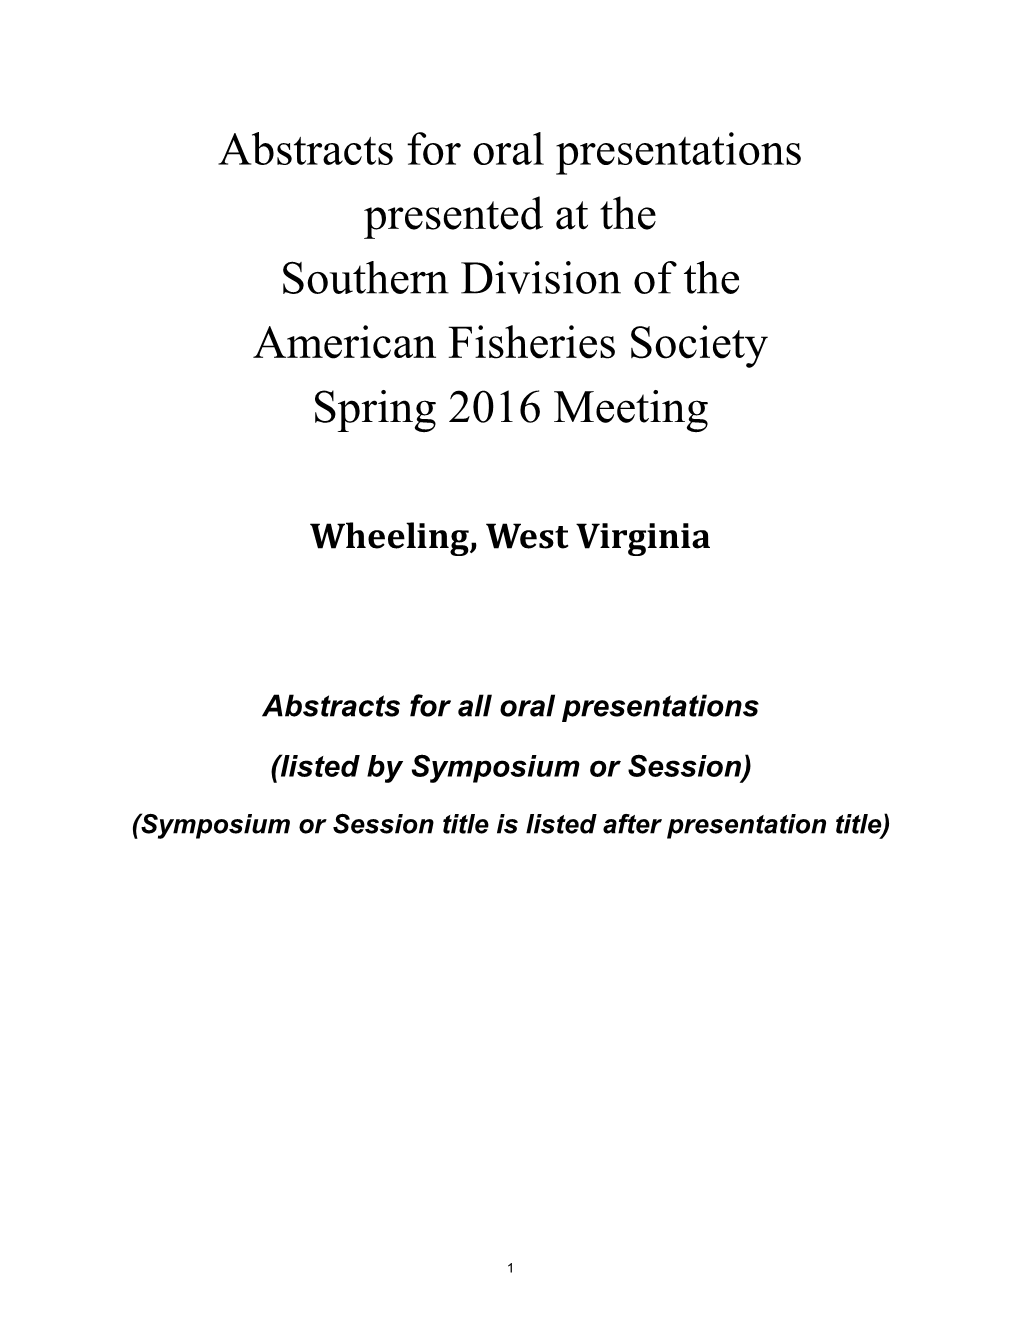 2016 Southern Division Spring Meeting, Wheeling, West Virginia